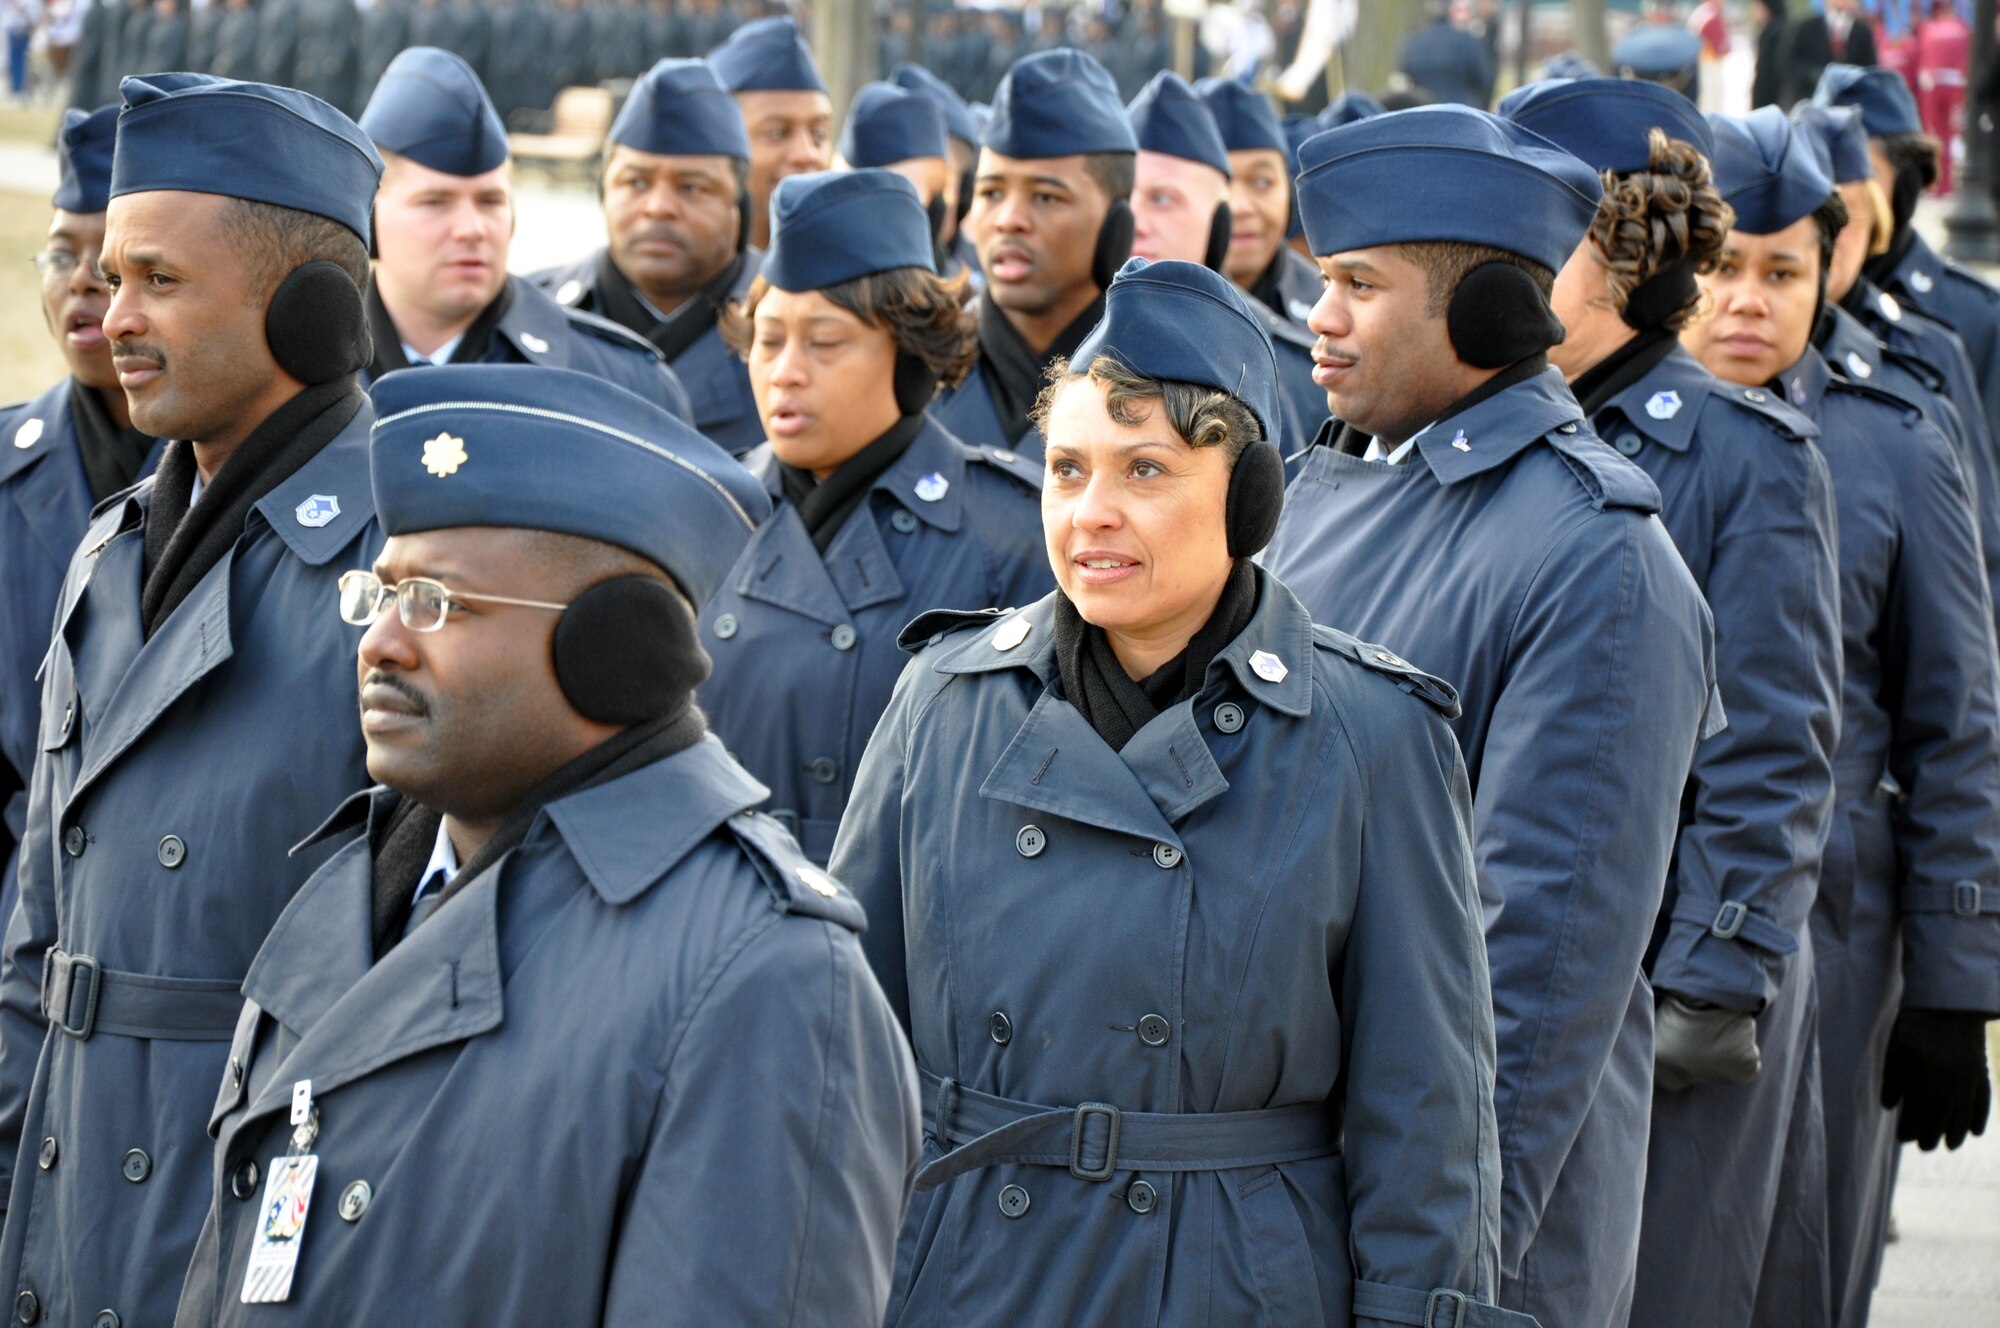 WASHINGTON -- Master Sgt. Crystal Smith, 459th Air Refueling Wing chaplain's assistant, waits with fellow wing members moments before marching in the Presidential Inaugural parade Jan. 20. The 90-member all-volunteer formation braved freezing temperatures and marched into history to celebrate the inauguration of Barack Obama, the first black President of the United States.  (U.S. Air Force photo/Tech. Sgt. Amaani Lyle)